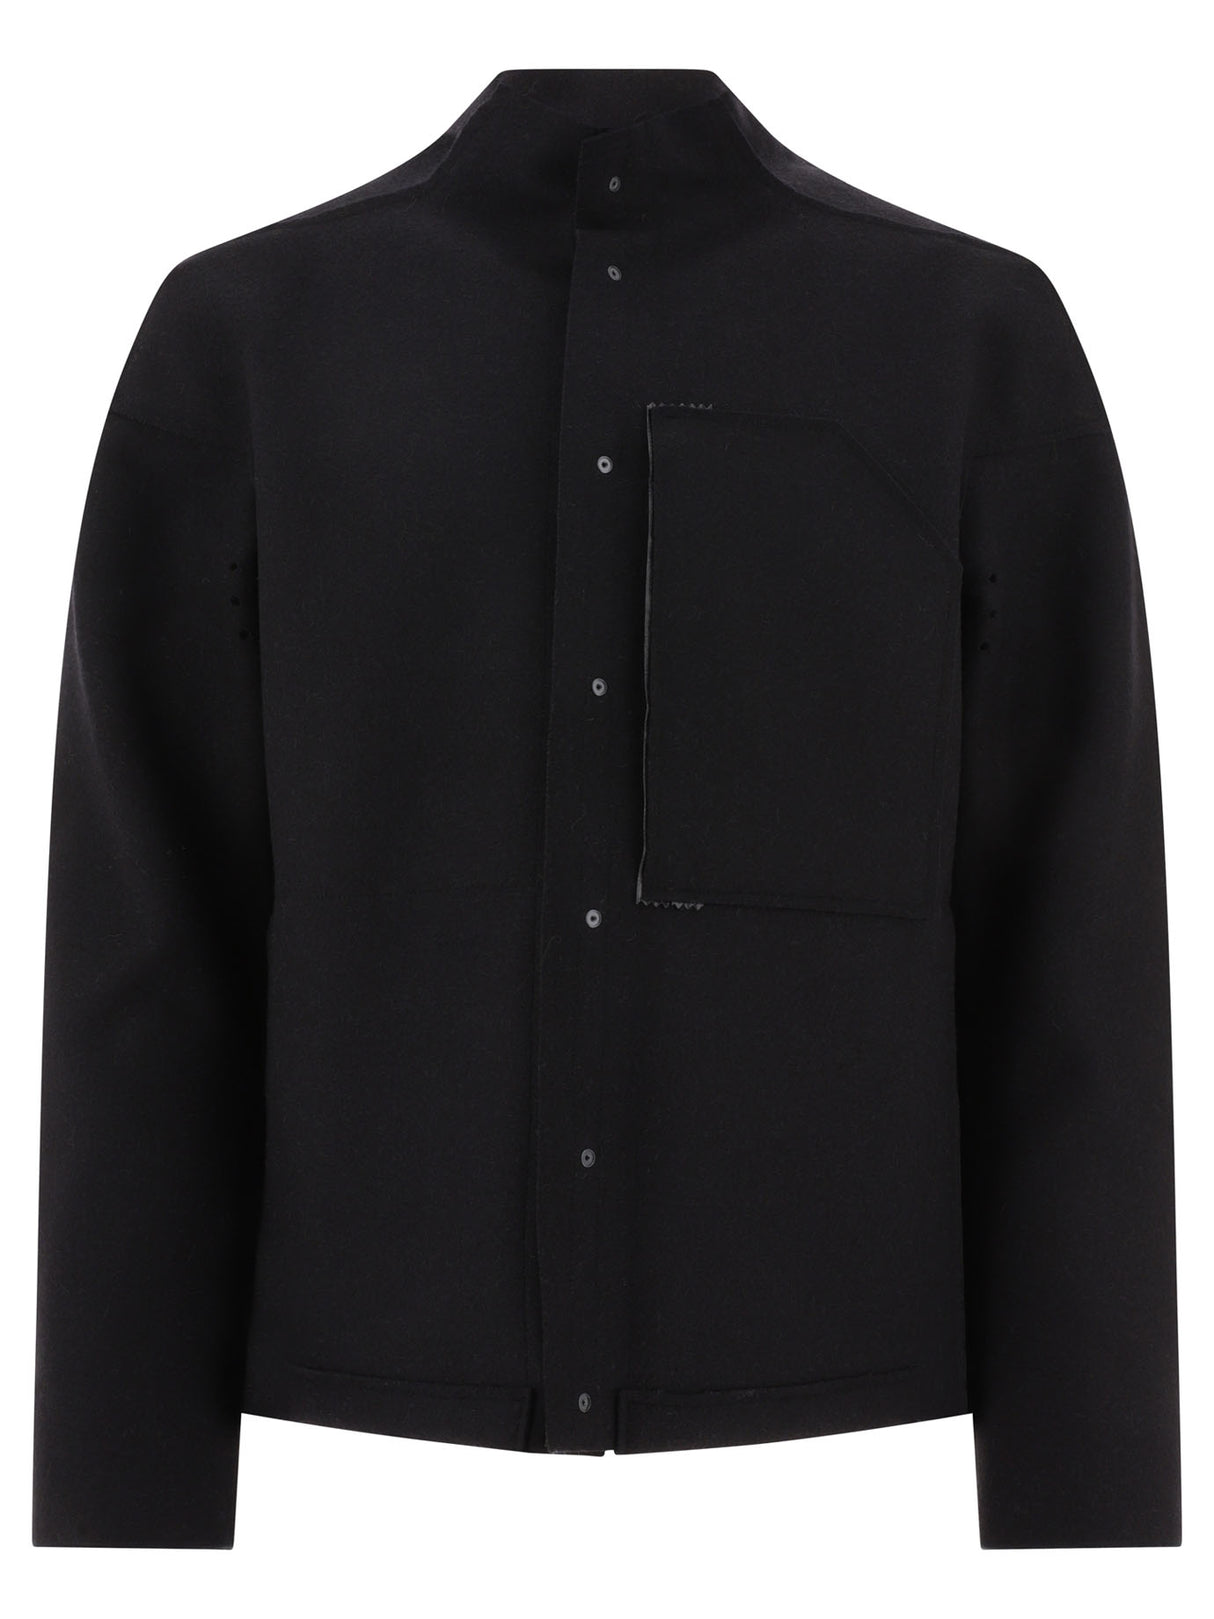 Men's Black Wool Jacket for FW23 by ACRONYM